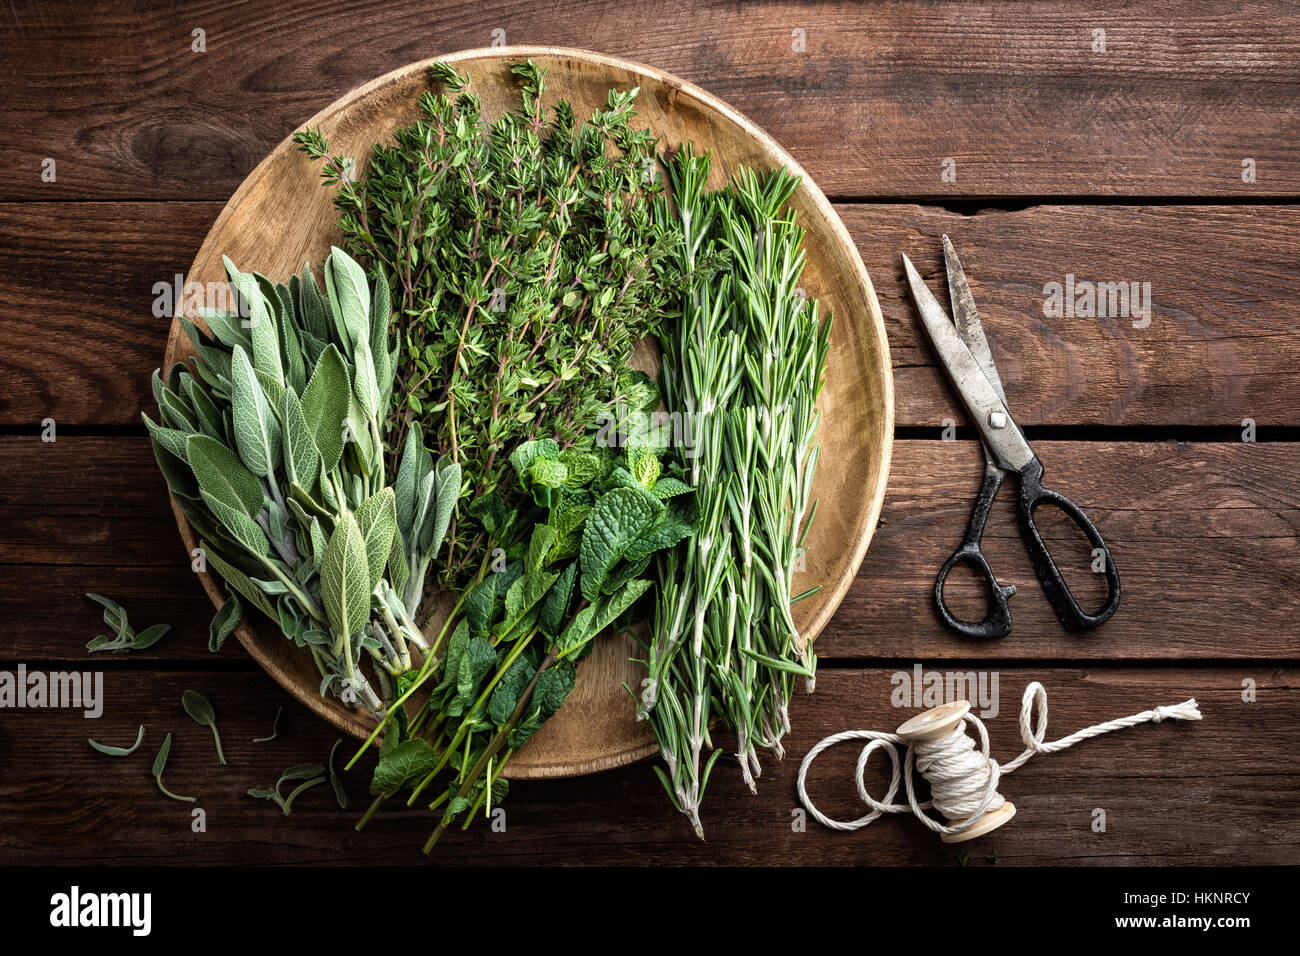 various fresh herbs, rosemary, thyme, mint and sage on wooden background Stock Photo